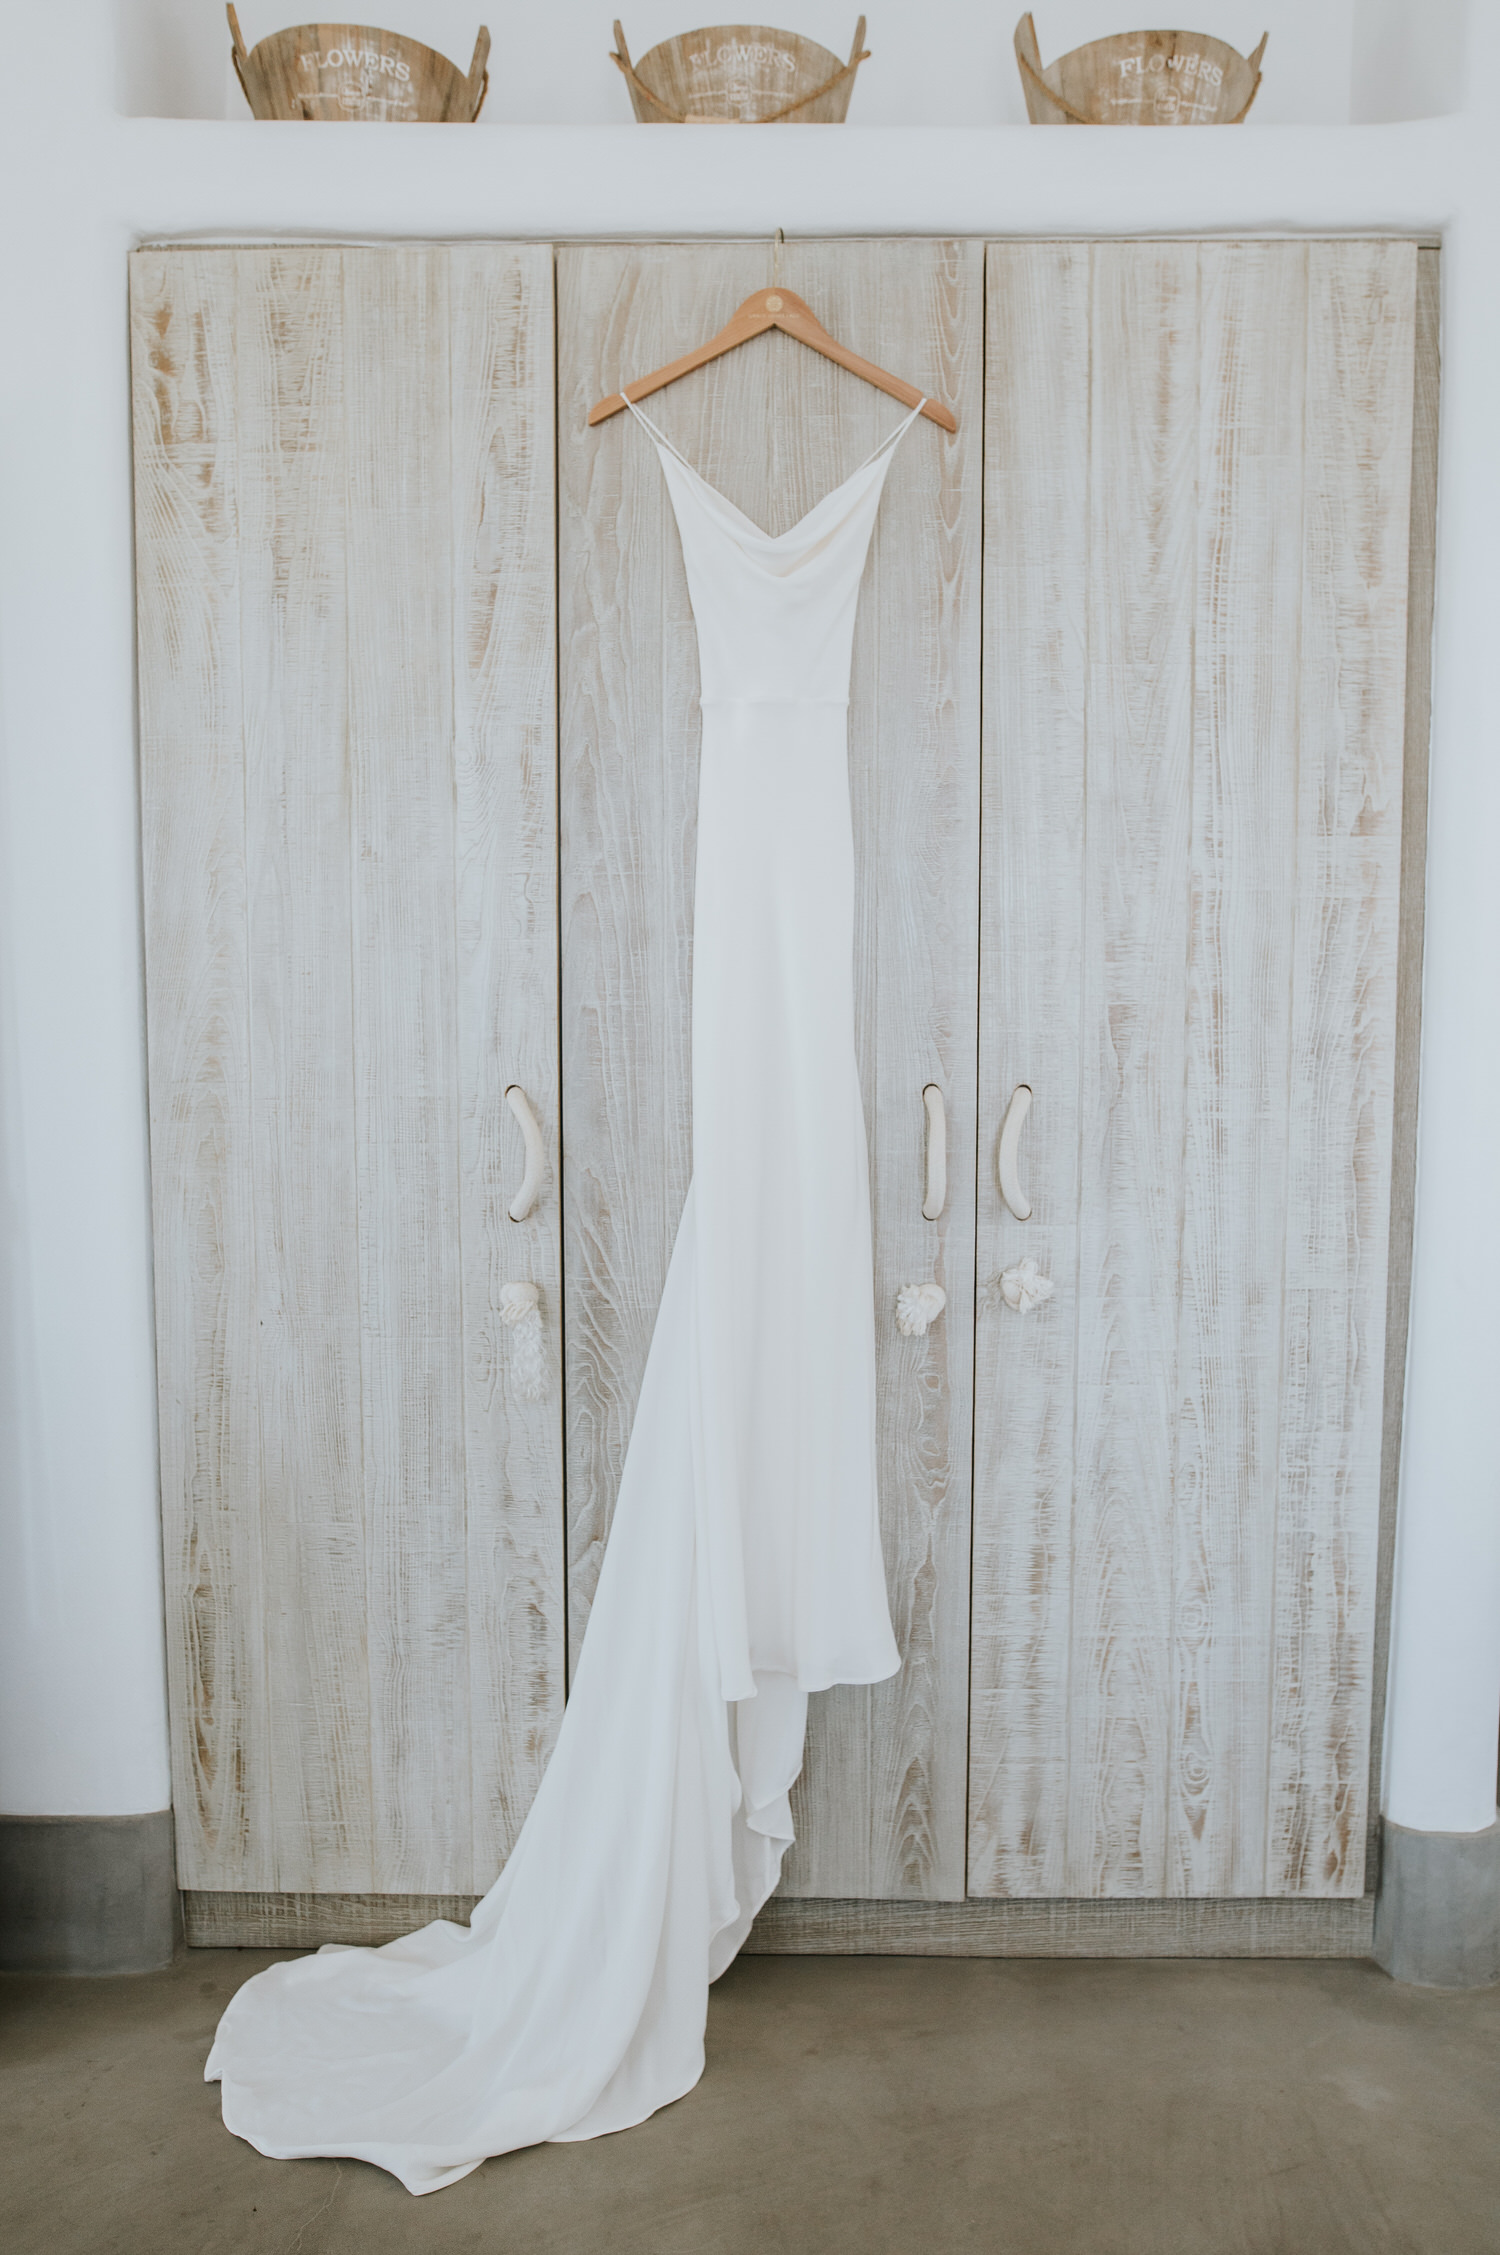 Mykonos wedding photographer: gorgeous floaty Grace loves lace wedding dress hanging on the beautiful wooden wardrobe door with three wooden baskets on top.